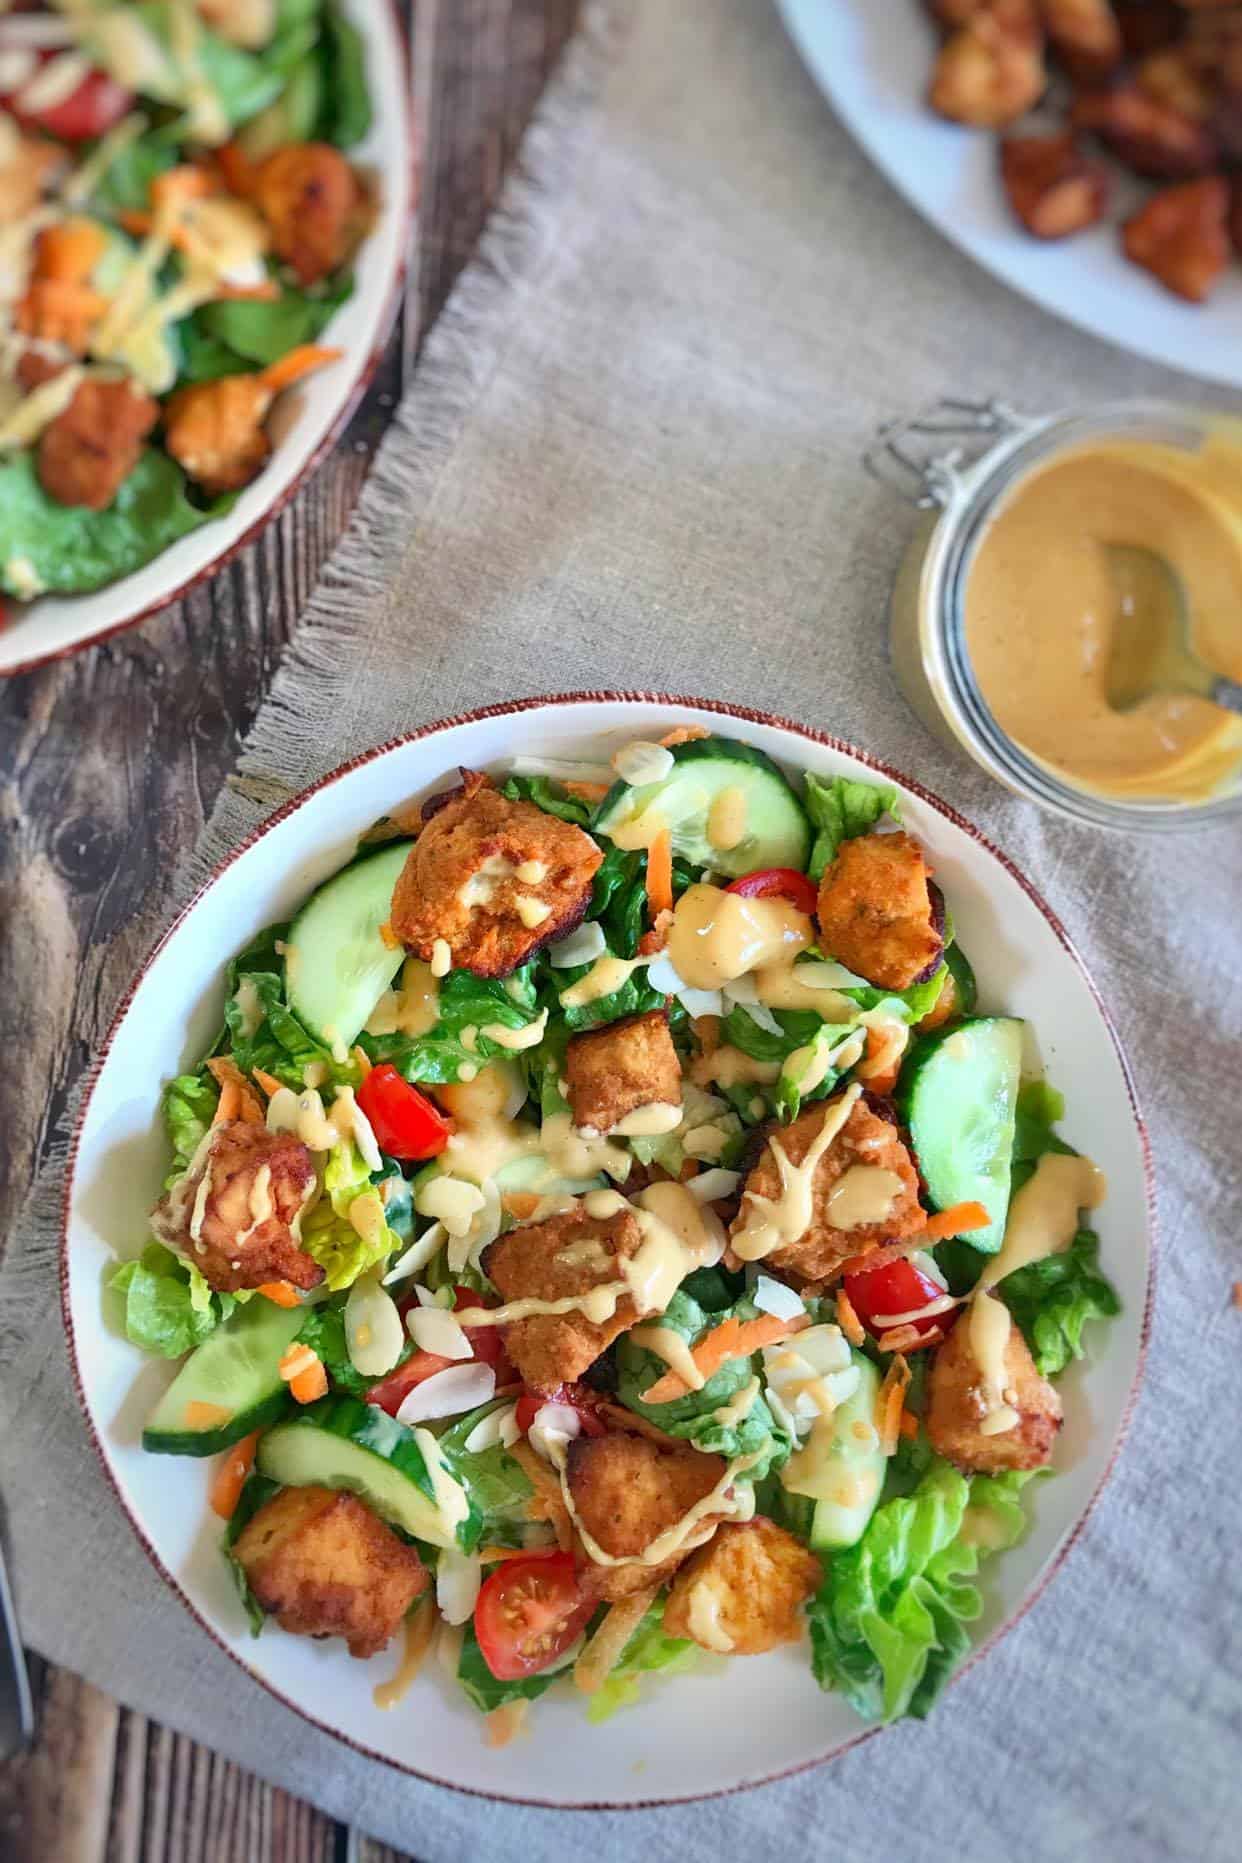 Hearty Country Salad with Tofu Nuggets & Vegan Honey Mustard Dressing